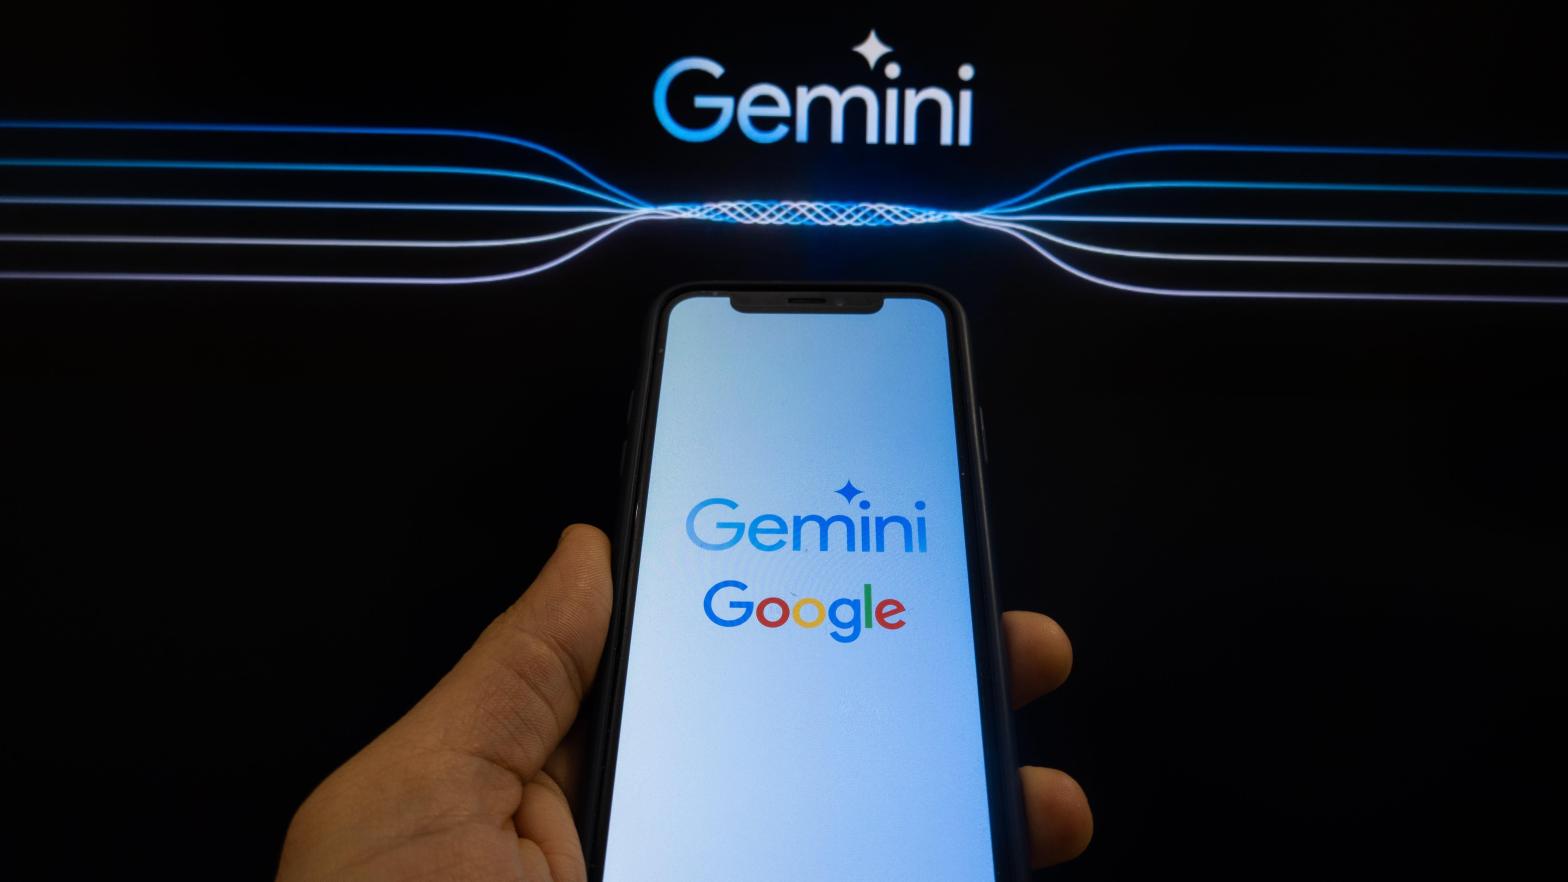 Google Will Let You Personalise Gemini After Your Favorite YouTuber